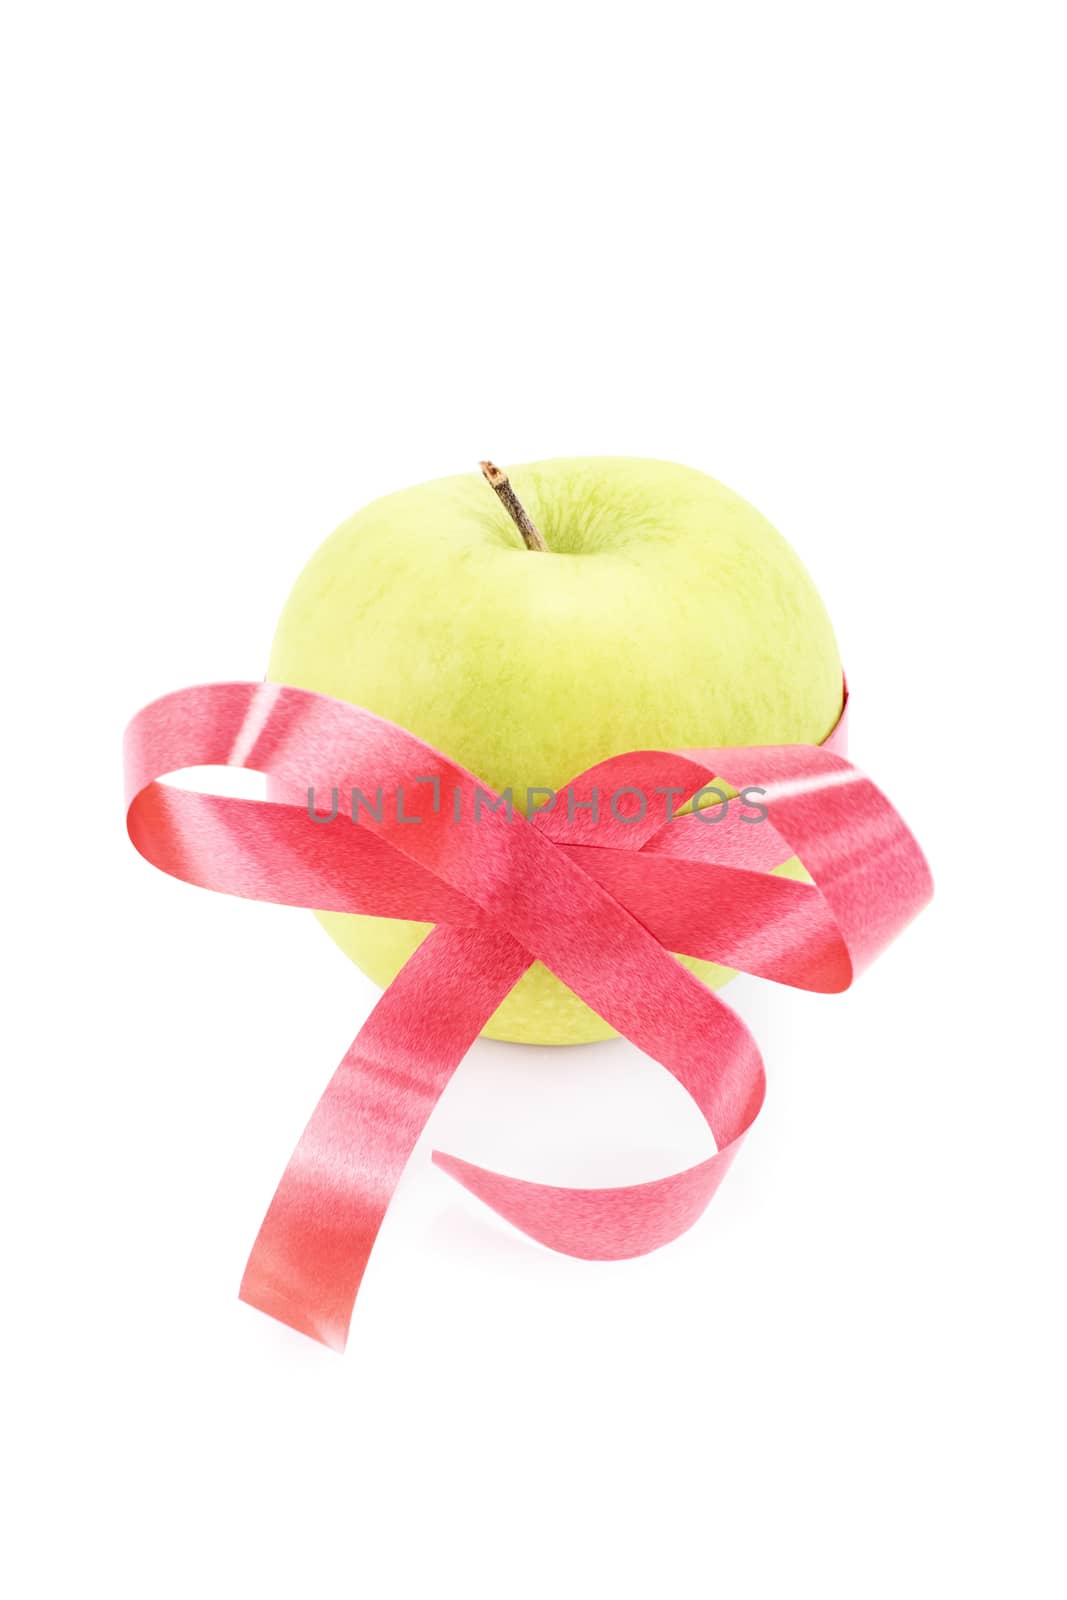 Green apple wrapped with red ribbon isolated on white background